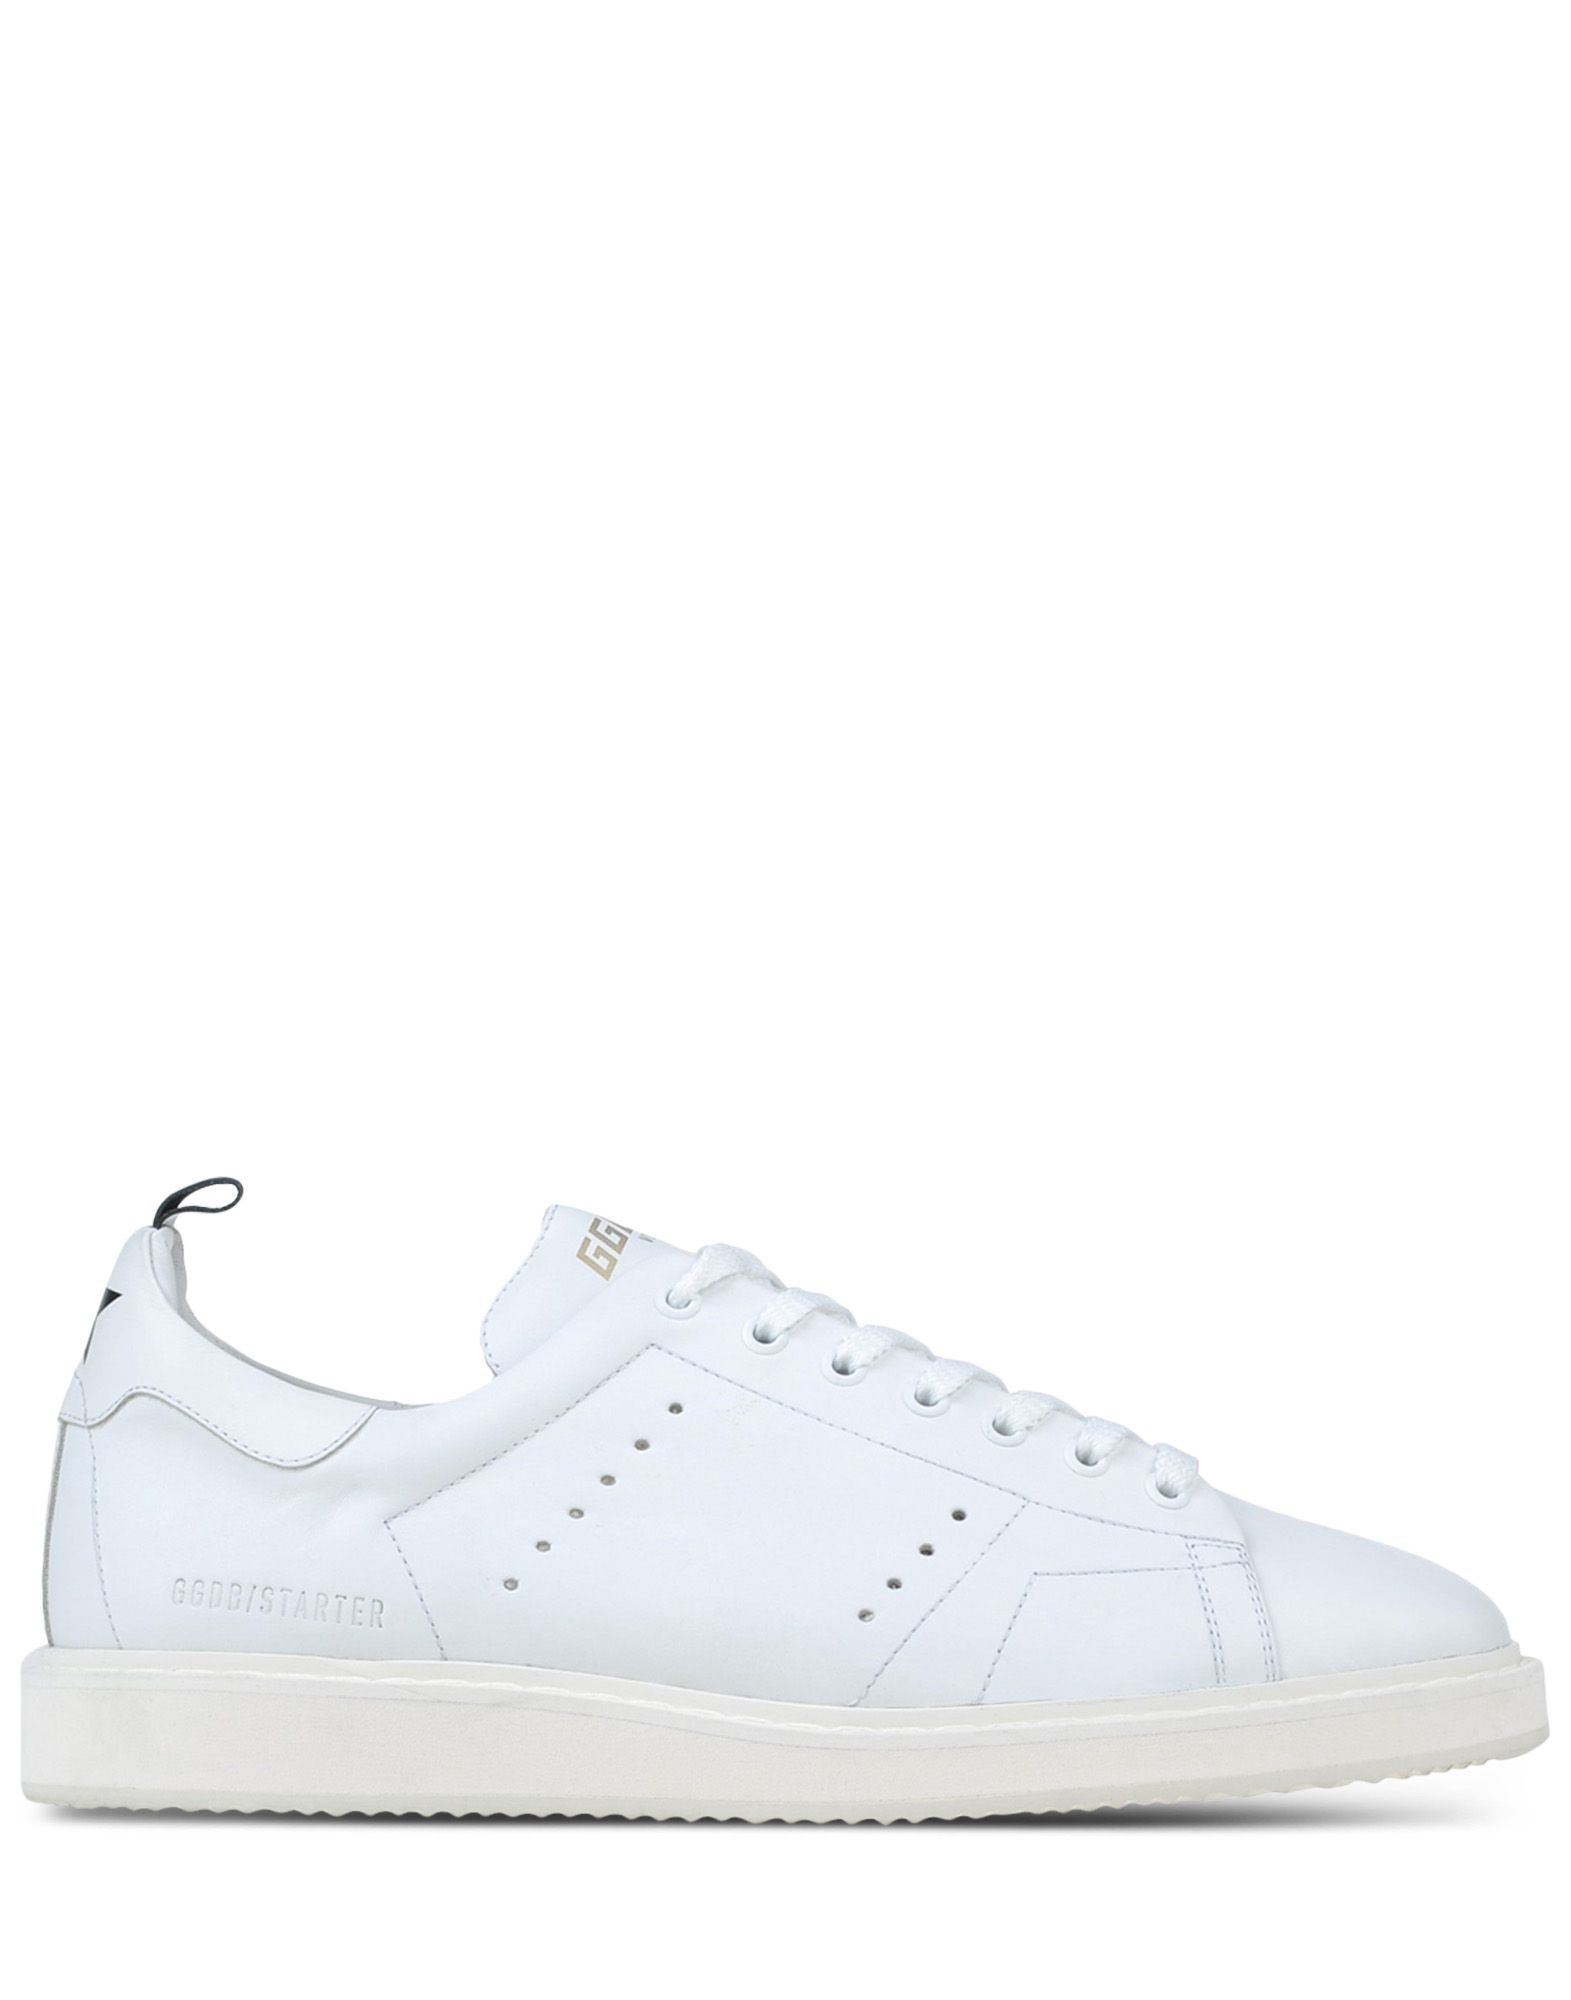 Golden goose deluxe brand Low-tops & Trainers in White for Men | Lyst